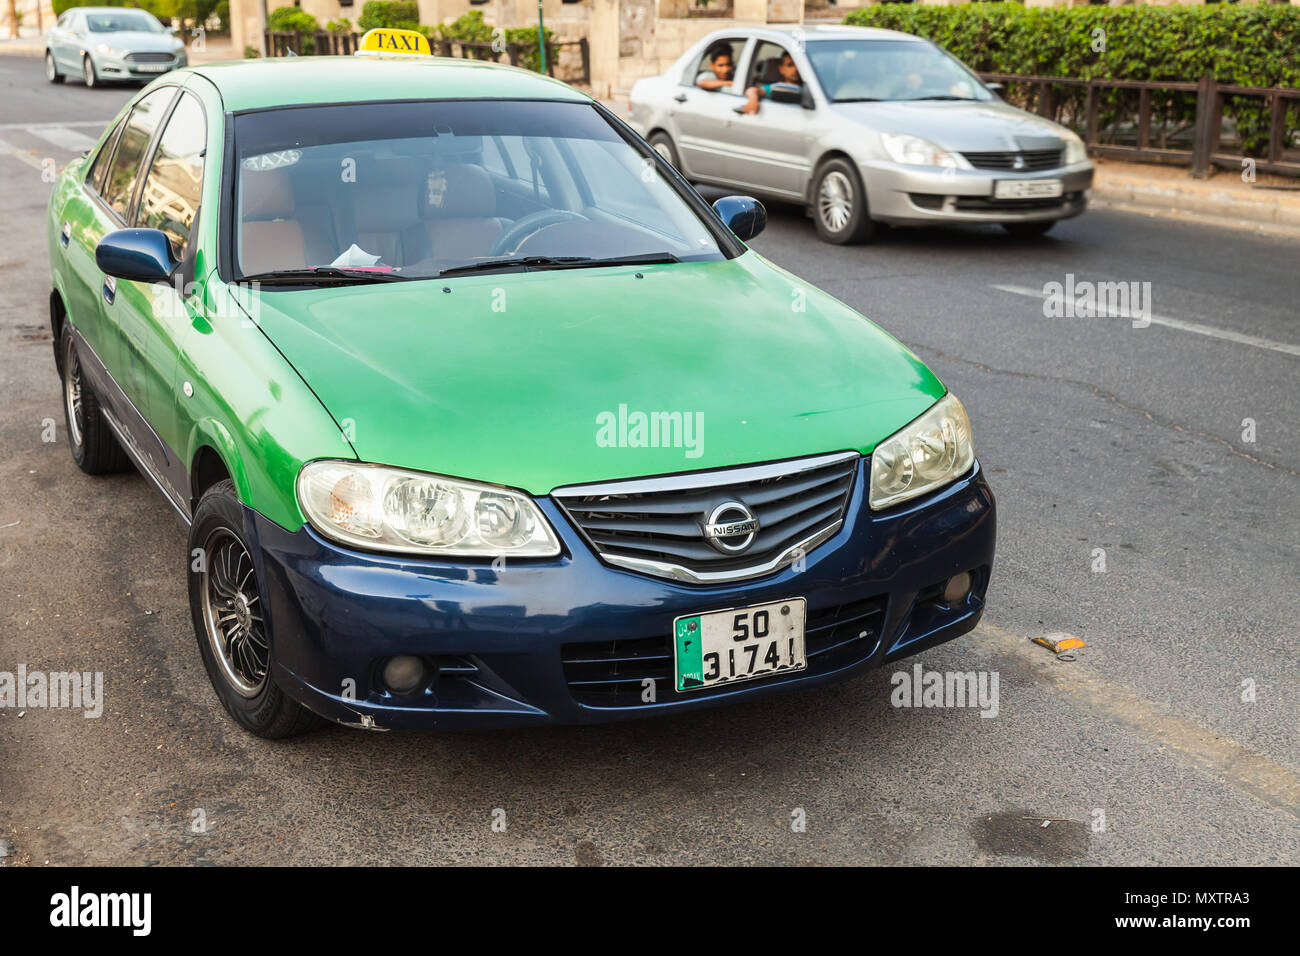 Aqaba, Jordan - May 18, 2018: Green Nissan car of Wadi Rum taxi company stands parked on a street side in Aqaba city Stock Photo